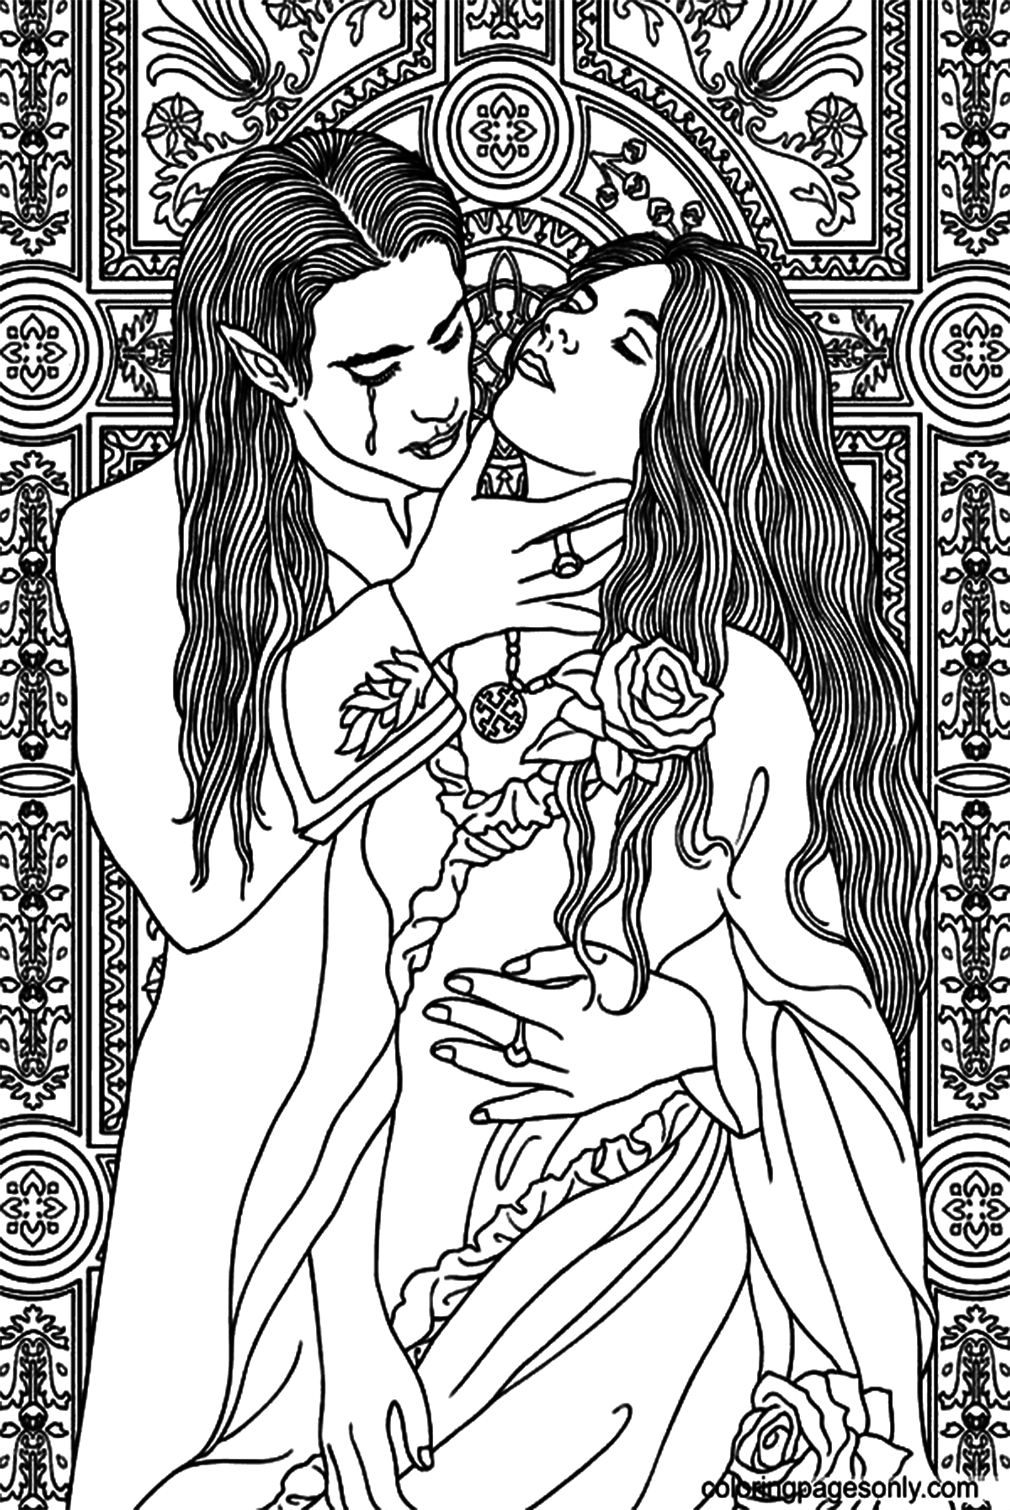 Vampire For Adults Coloring Pages